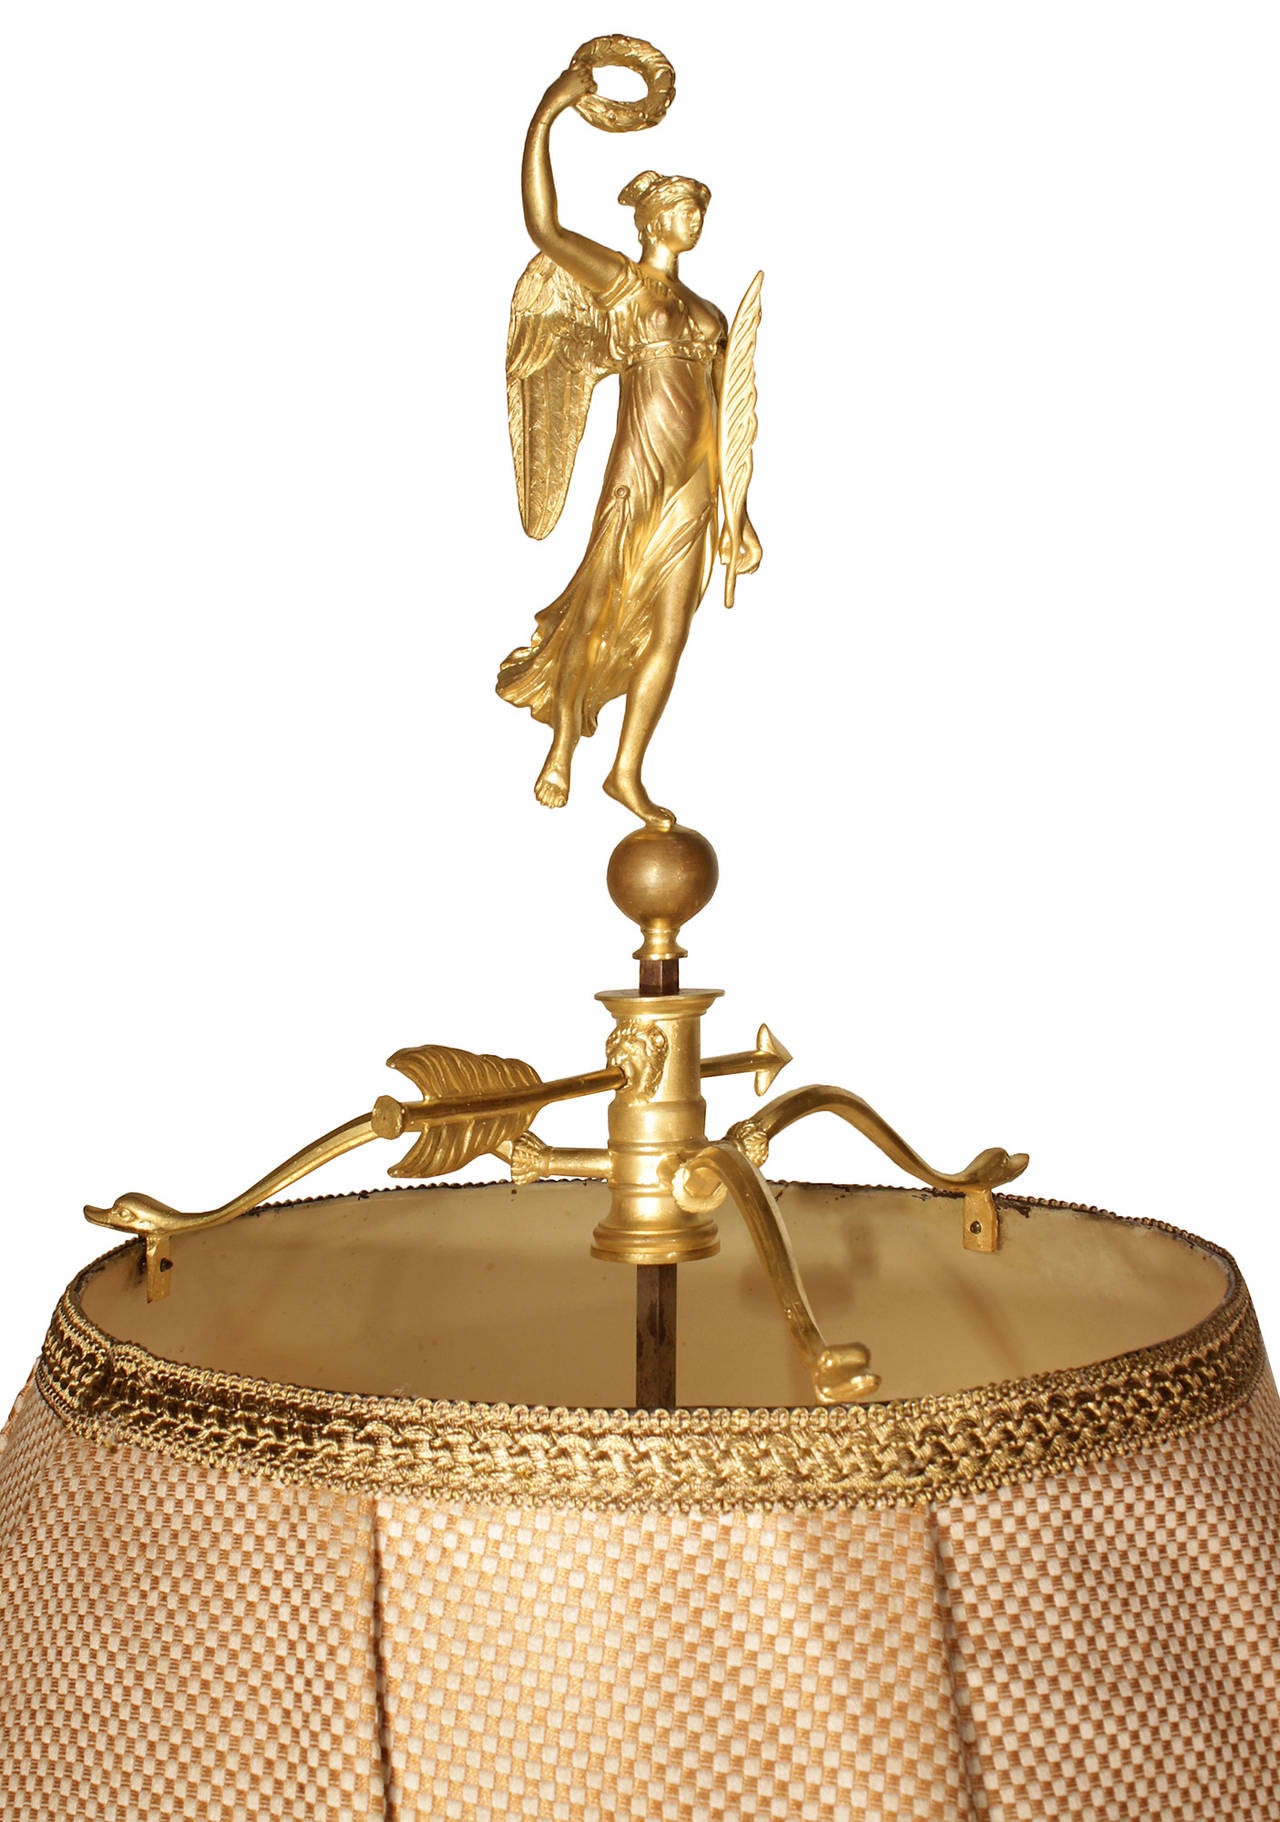 A charming and high quality French 19th century Empire st. ormolu Bouillotte Lamp. The lamp is raised by a circular ormolu base with acanthus leaves, Rai-de-Coeur and reeded patterns. At the fut are fine mounts of winged maidens. Each of the three C